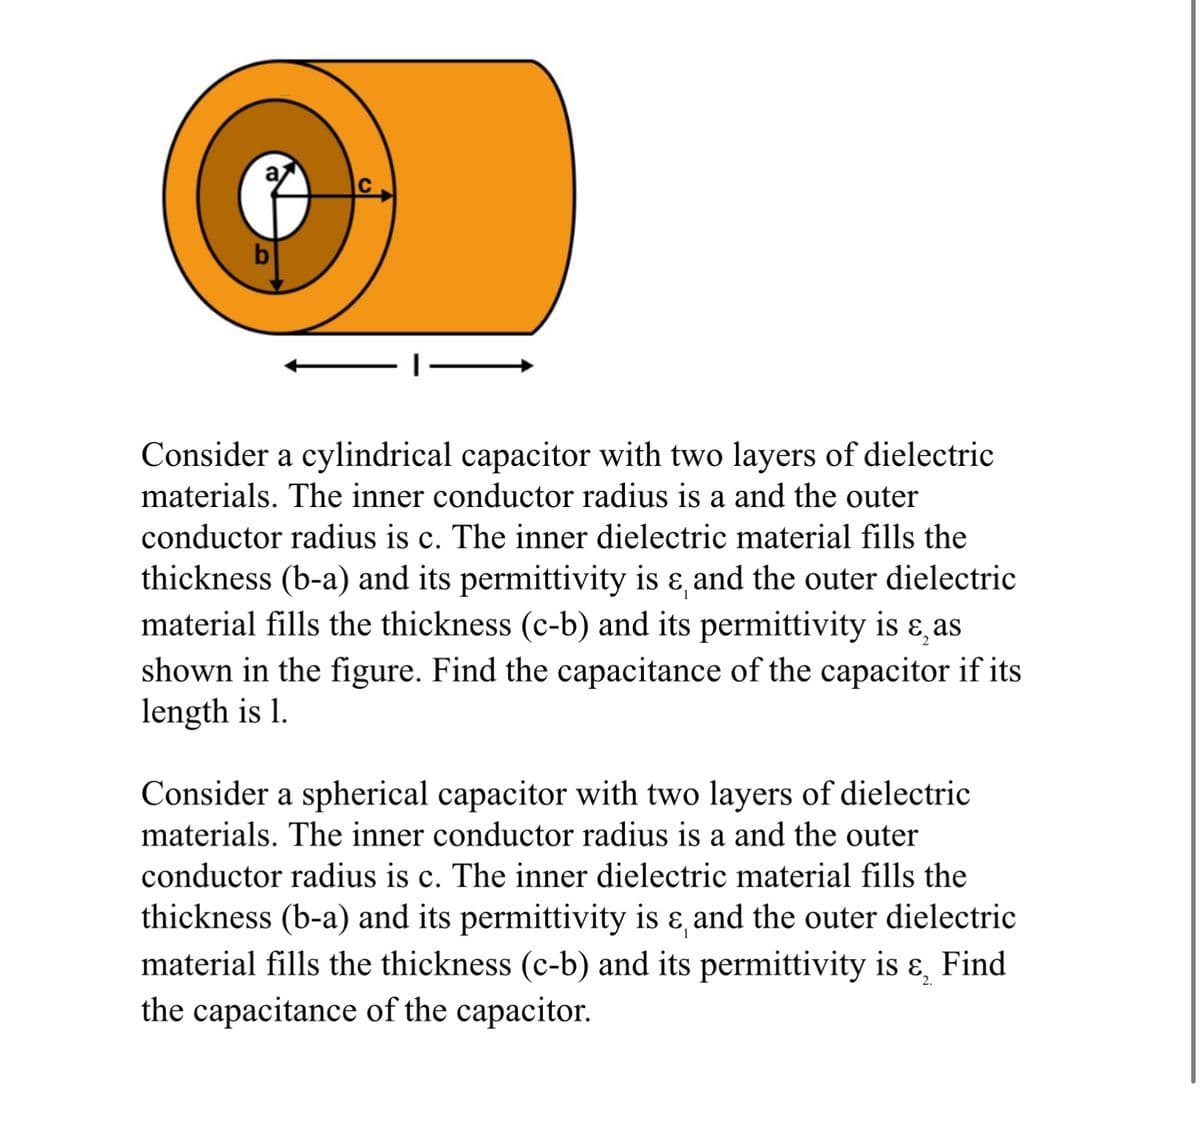 Consider a cylindrical capacitor with two layers of dielectric
materials. The inner conductor radius is a and the outer
conductor radius is c. The inner dielectric material fills the
thickness (b-a) and its permittivity is & and the outer dielectric
material fills the thickness (c-b) and its permittivity is ε, as
shown in the figure. Find the capacitance of the capacitor if its
length is 1.
Consider a spherical capacitor with two layers of dielectric
materials. The inner conductor radius is a and the outer
conductor radius is c. The inner dielectric material fills the
thickness (b-a) and its permittivity is & and the outer dielectric
material fills the thickness (c-b) and its permittivity is ६,
Find
the capacitance of the capacitor.